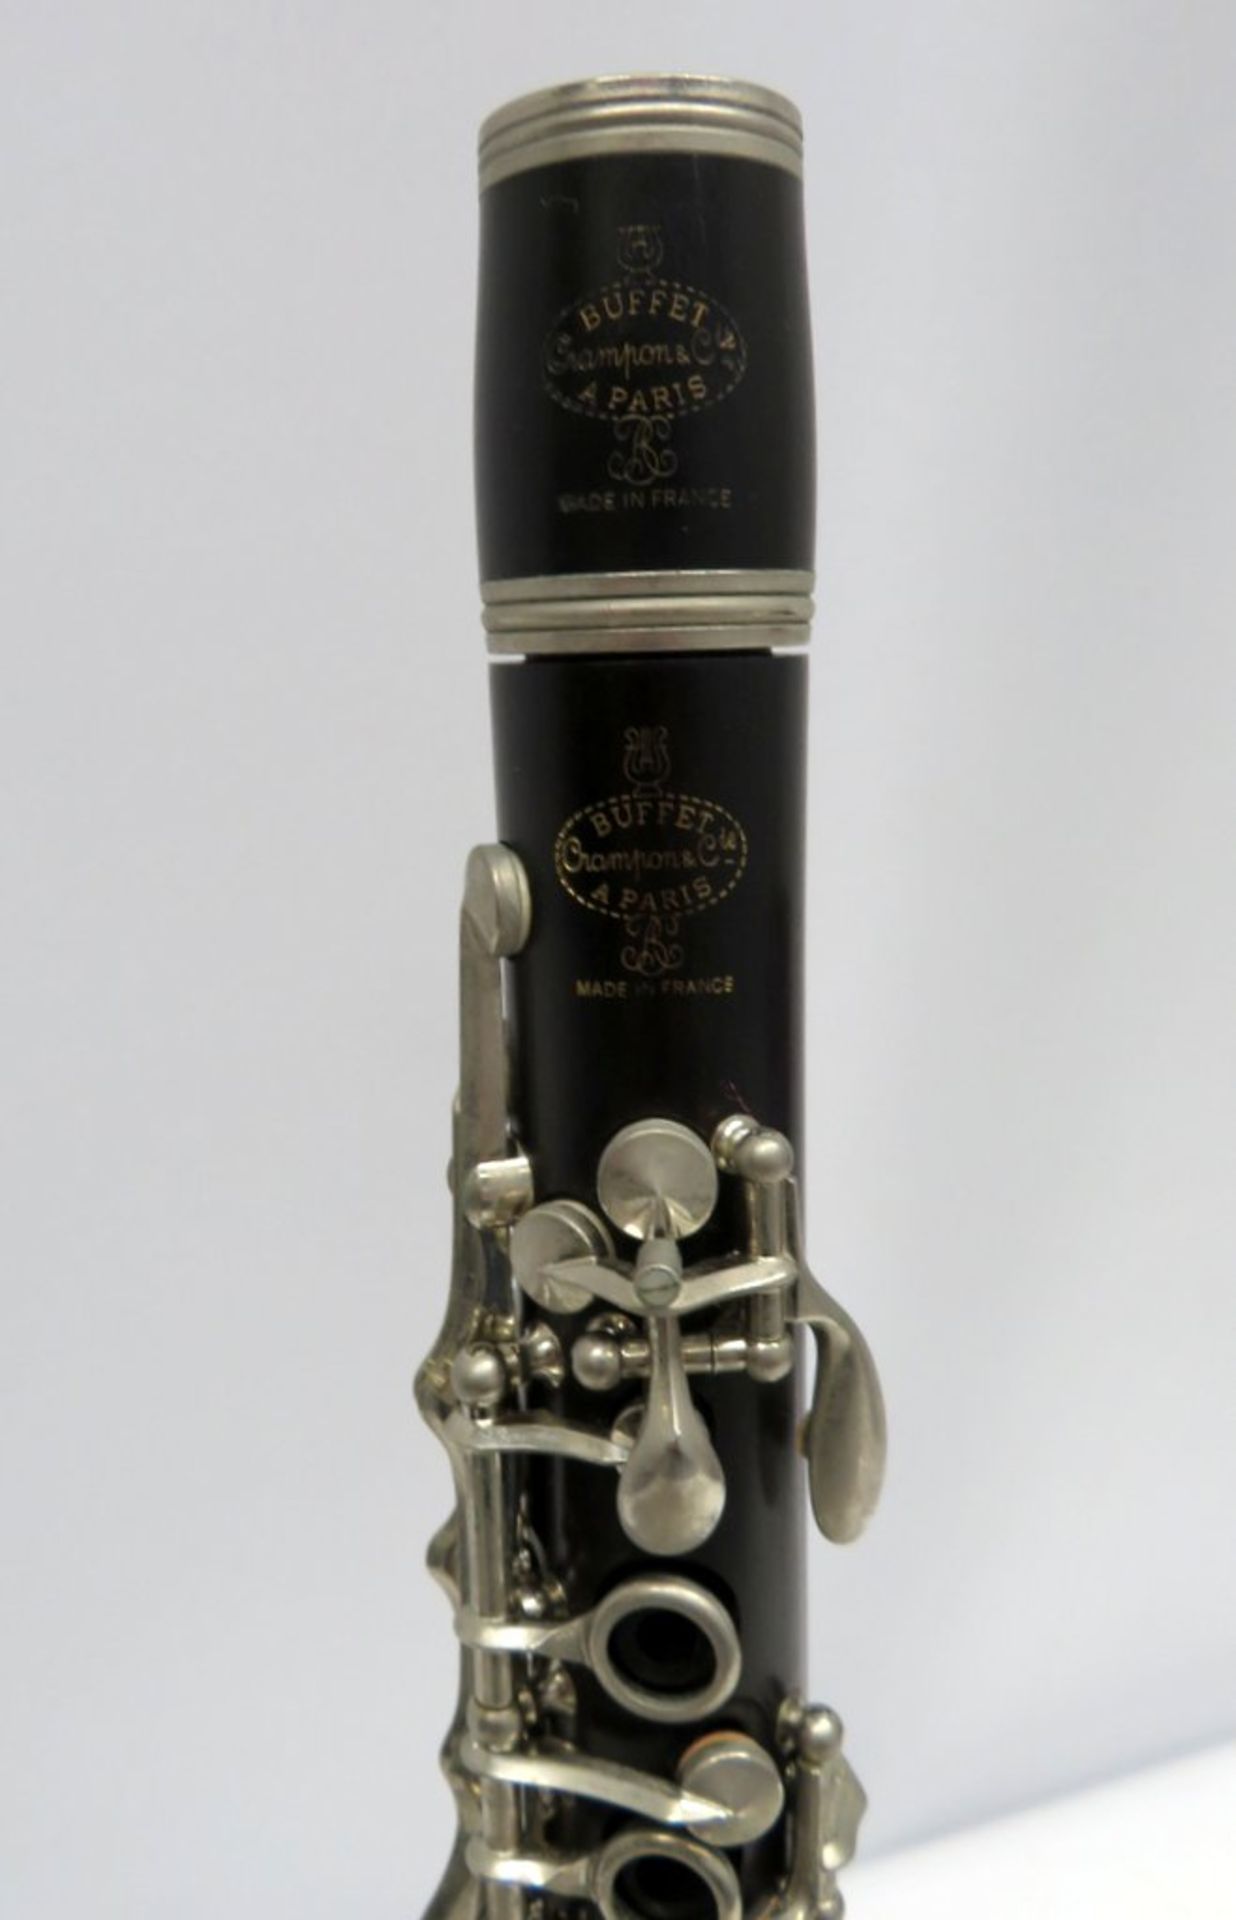 Buffet Crampon E Flat Clarinet Complete With Case. - Image 6 of 14